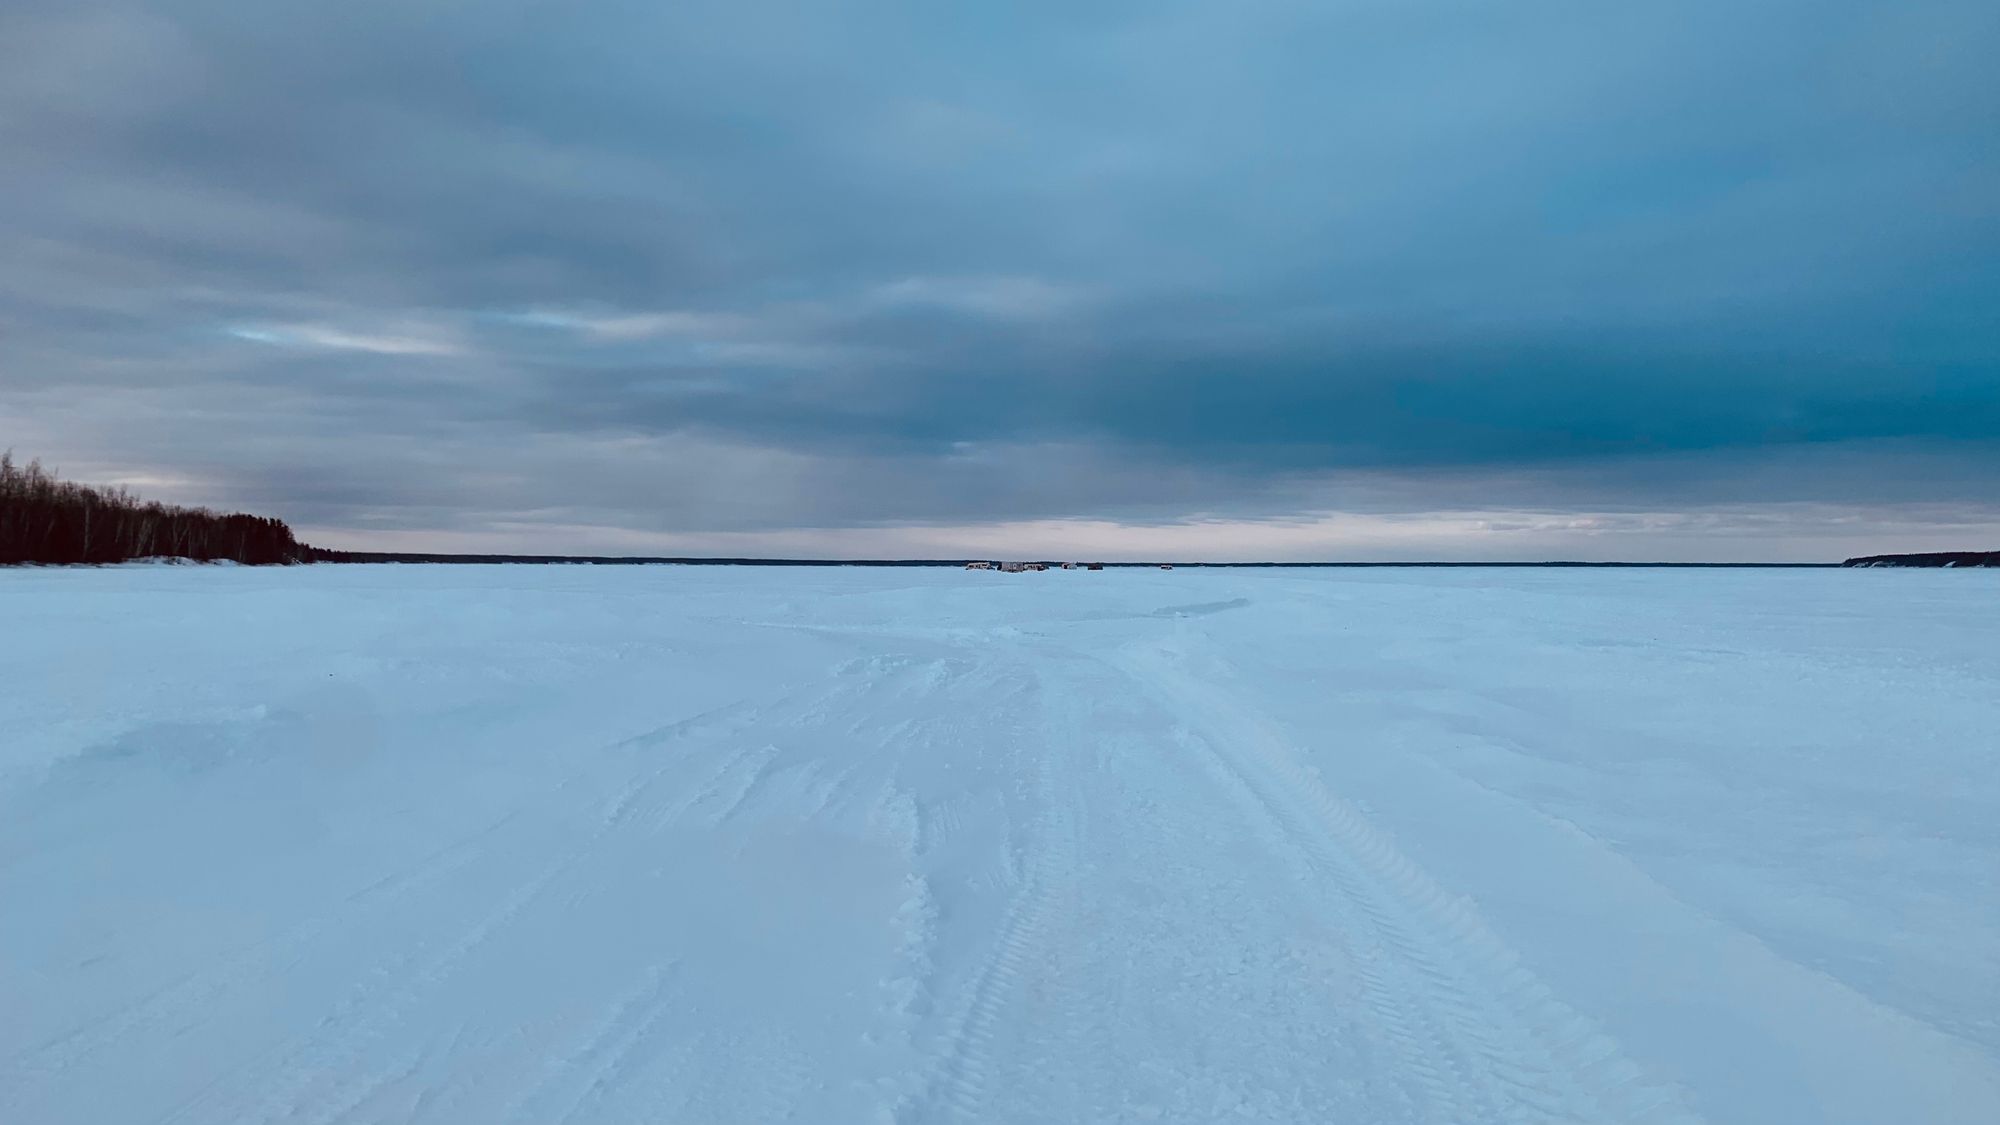 I ventured out onto the lake to look at the ice fishing shacks. They were huddled together in little communities, connected and divided by where the roads had been plowed.